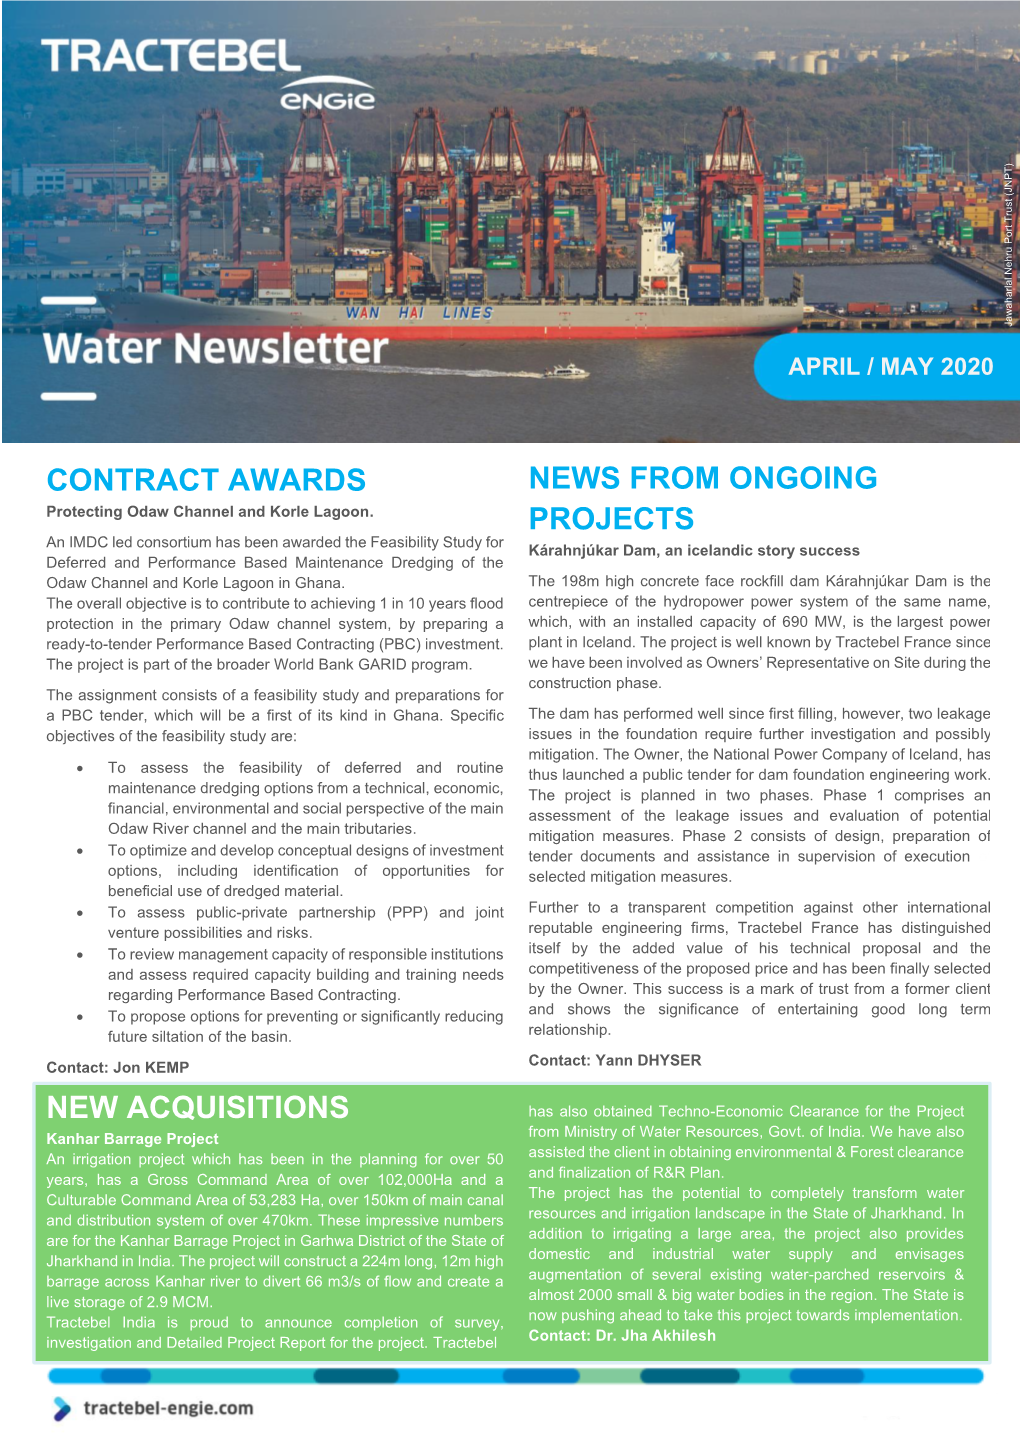 Water Newsletter April/May 2020